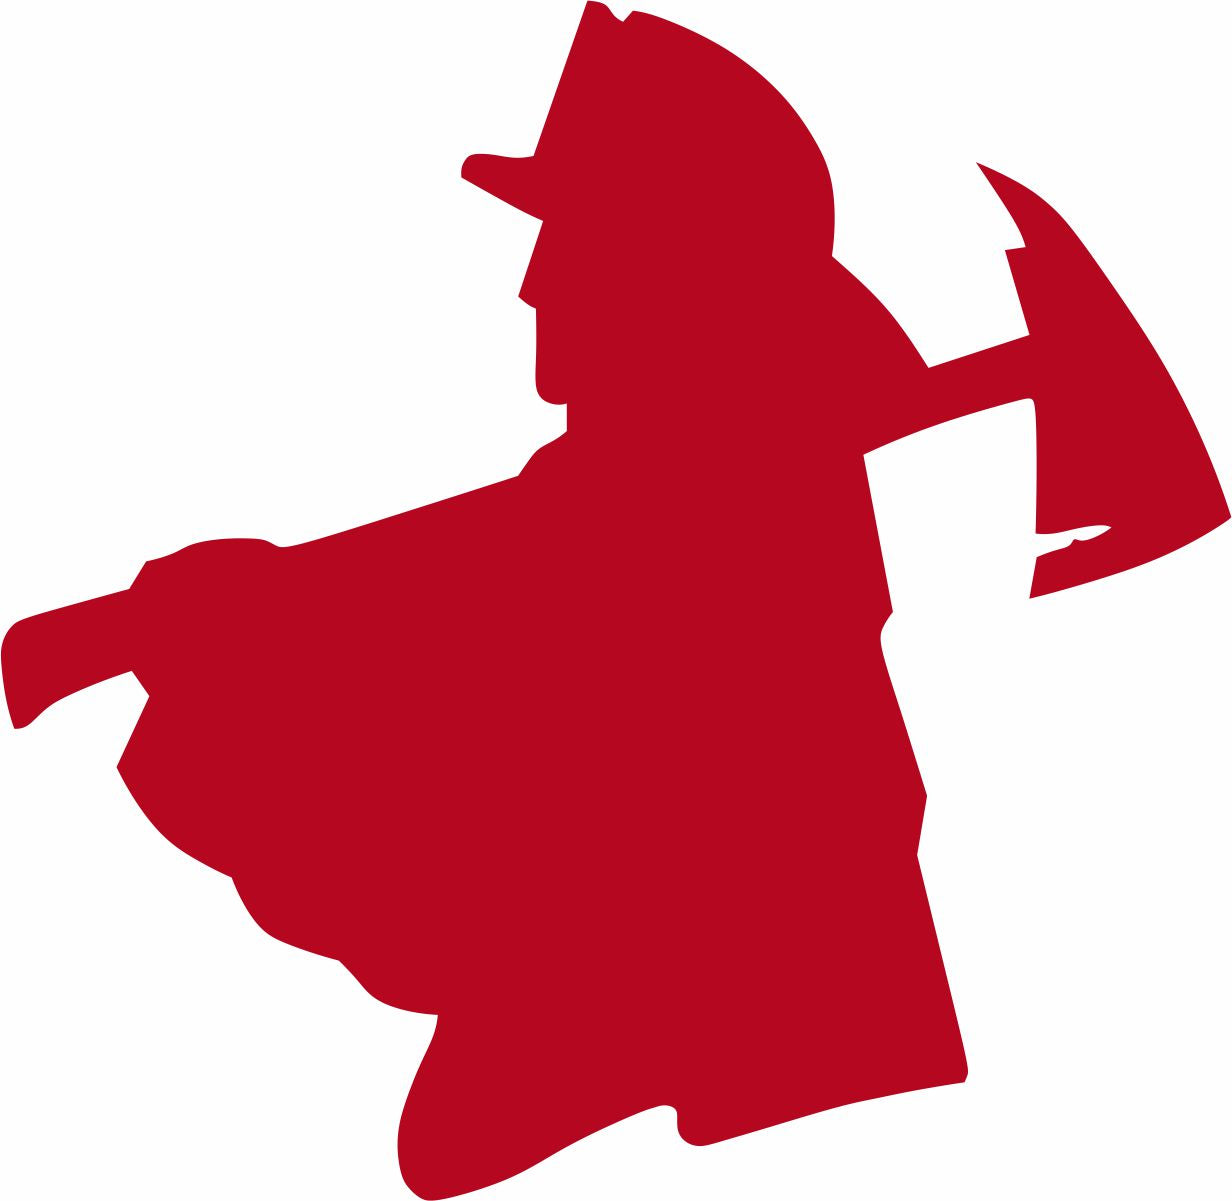 Firefighter Silhouette Decal - Powercall Sirens LLC